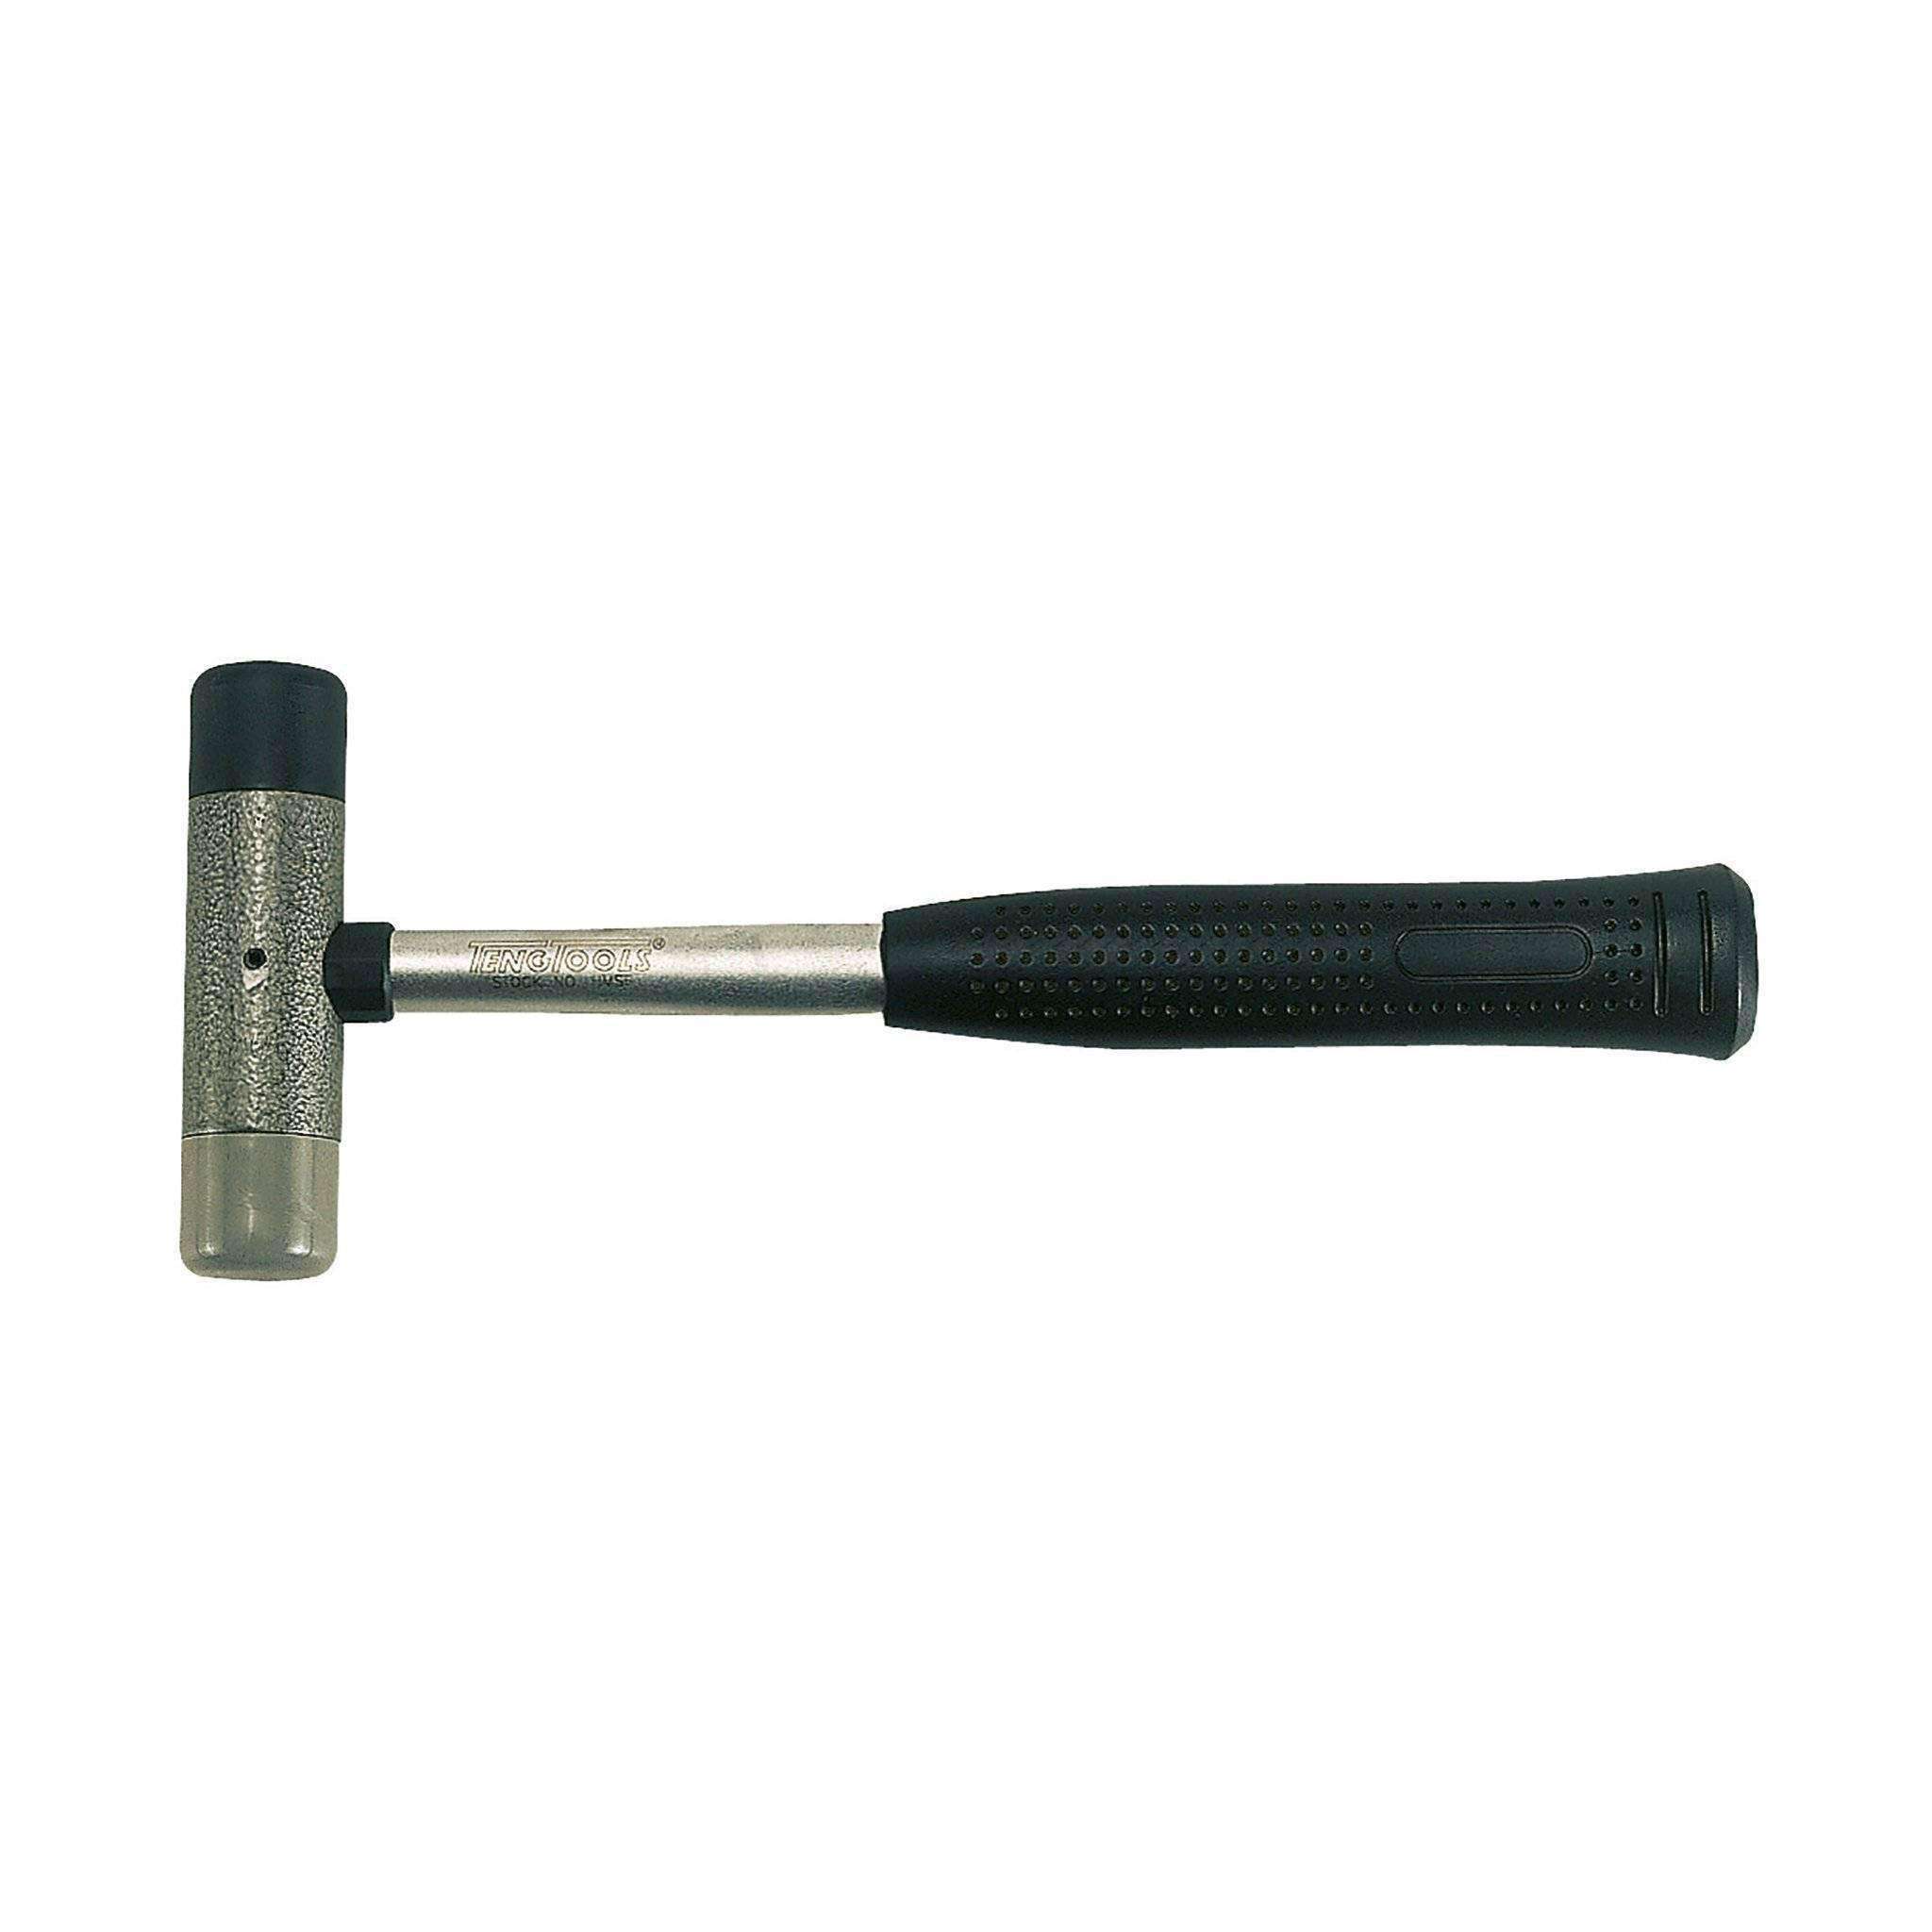 Teng Tools Soft Face Hammer | Non-Marring Rubber, Lightweight Tubular Steel Handle with Comfortable Non-Slip Grip